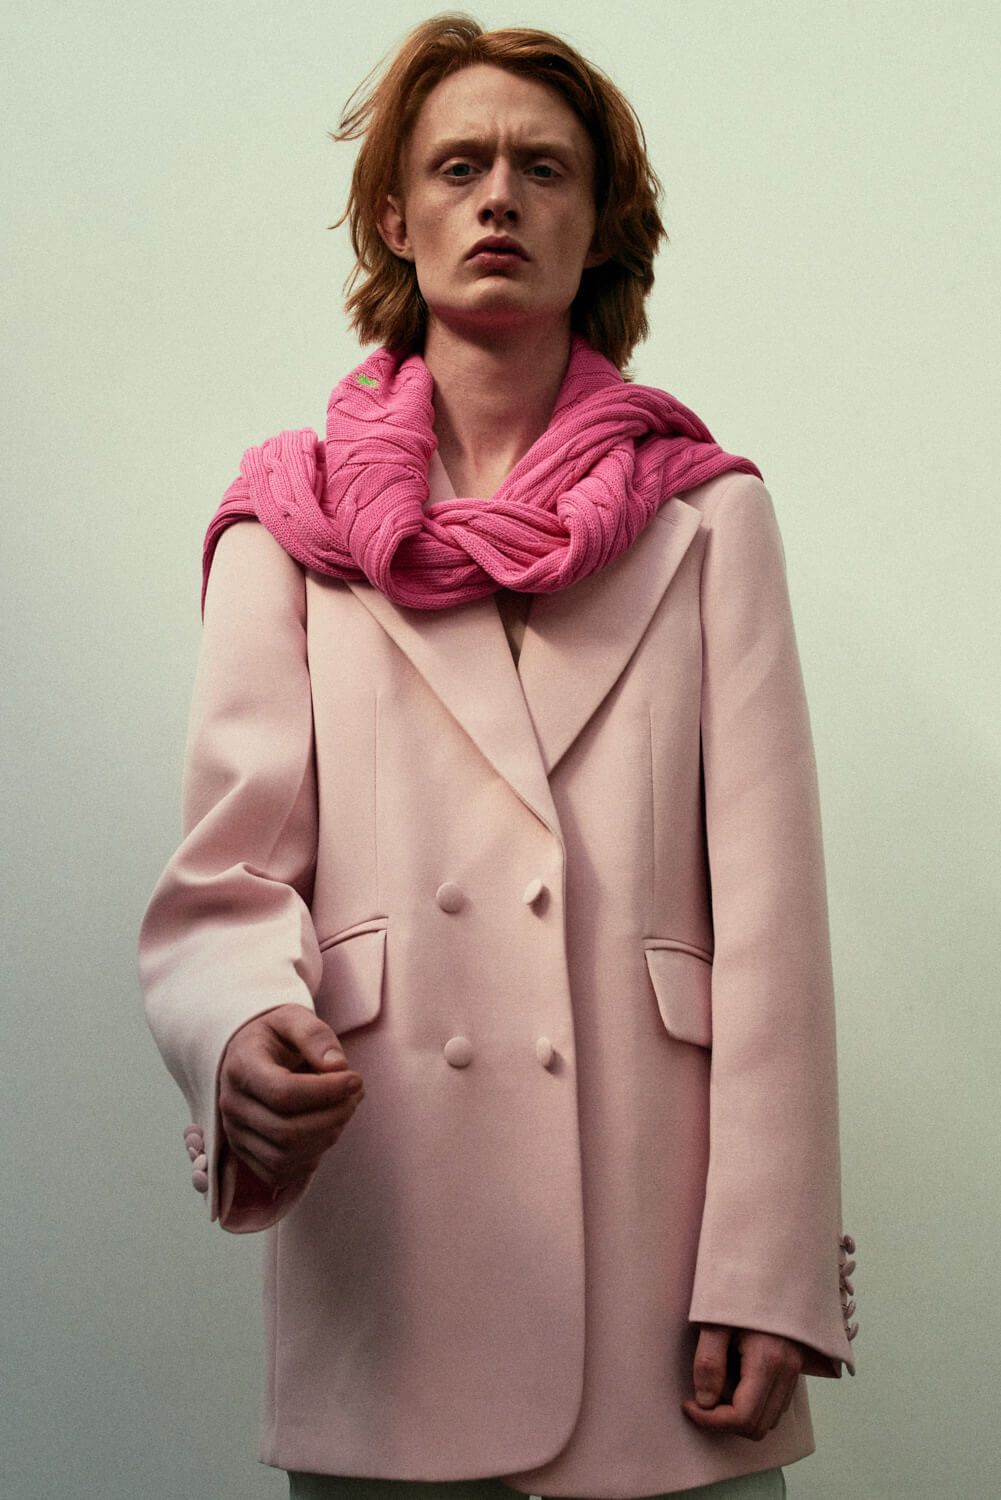 Lad,  baggy pink jacket by lifestyle photographer Tim Cole 